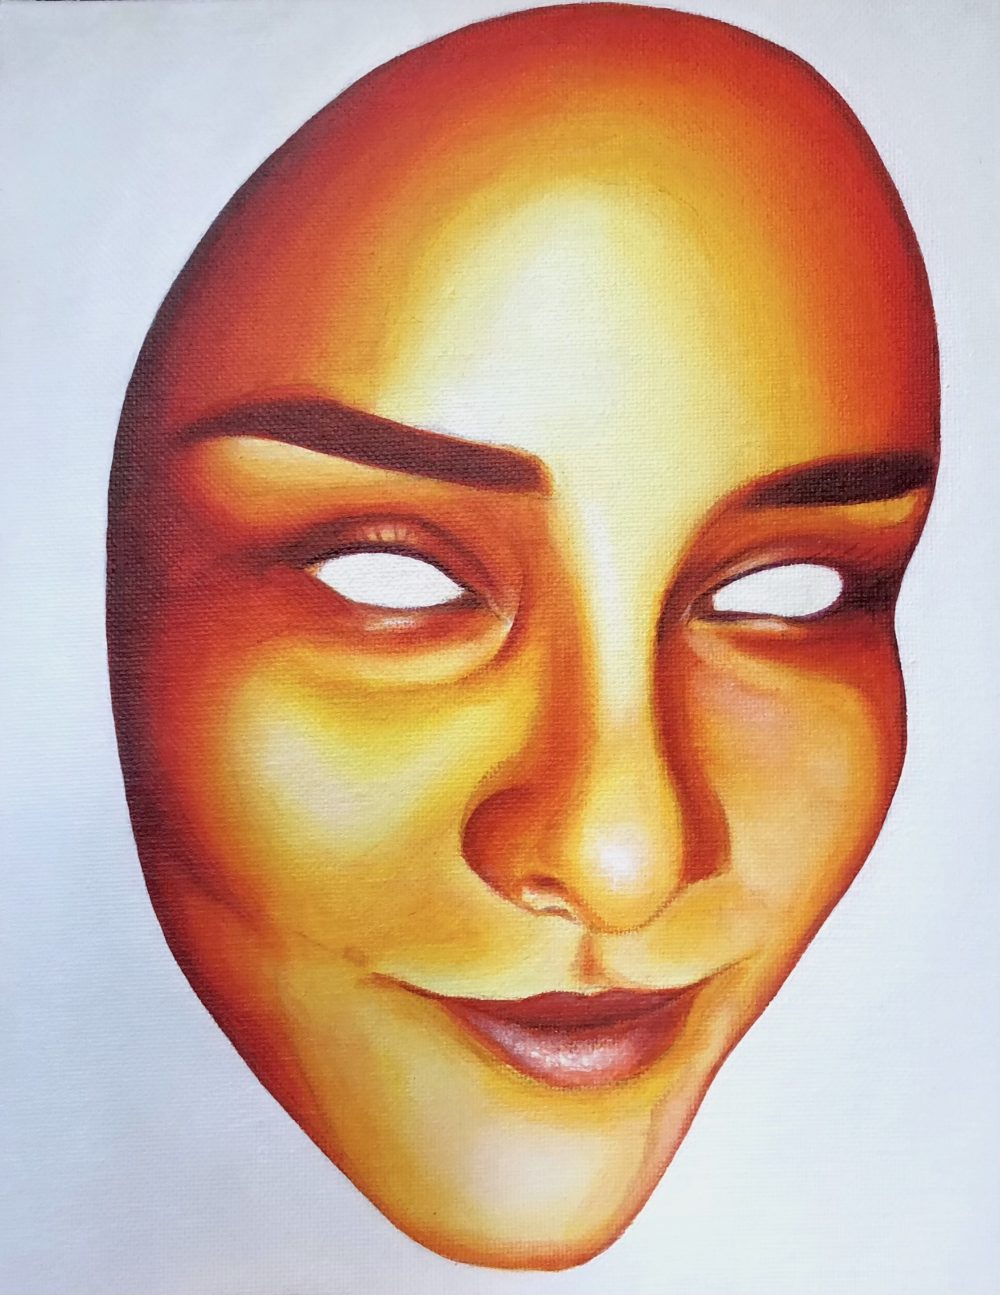 A painting of a woman's smiley face in warm tones without hair or eyes over a white background.